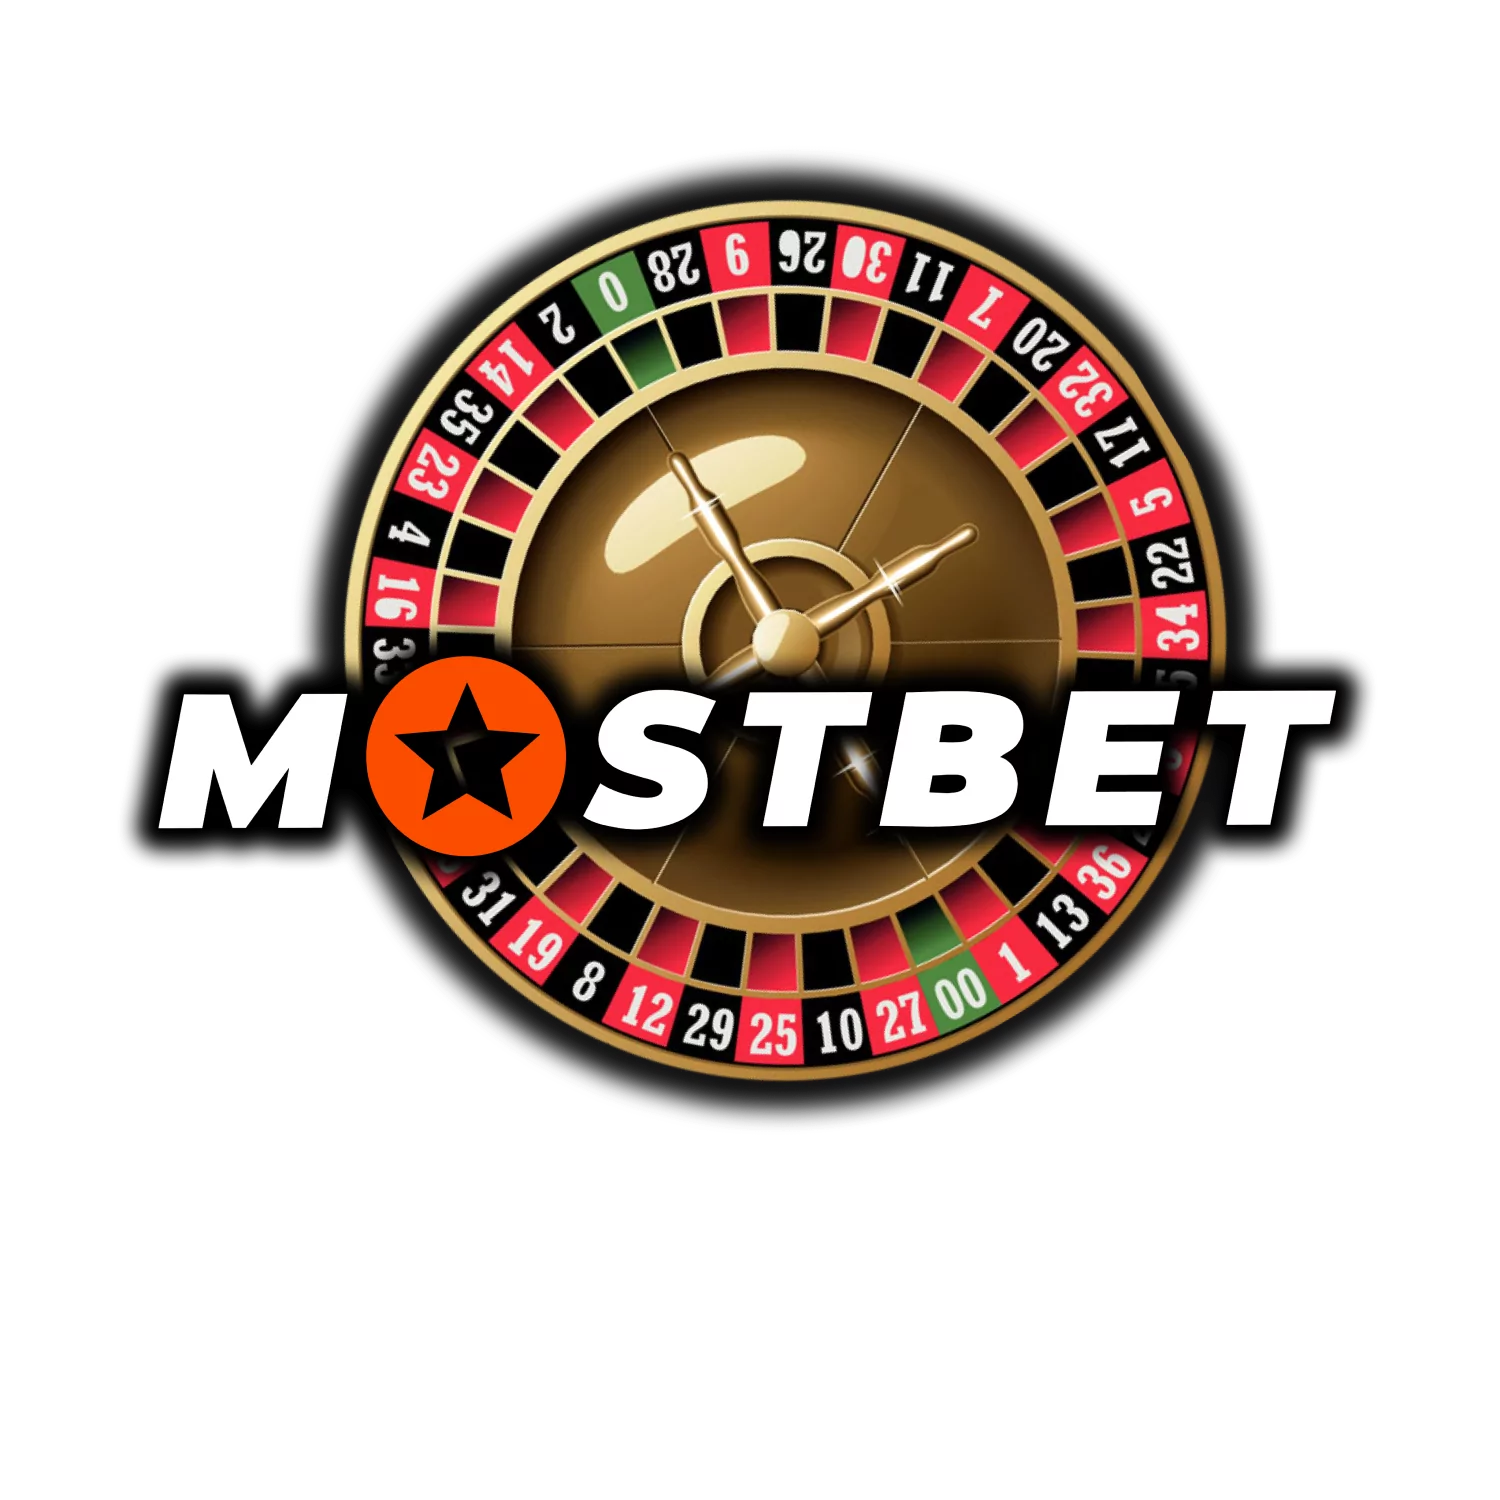 At Mostbet you can have a great time playing live casino games.